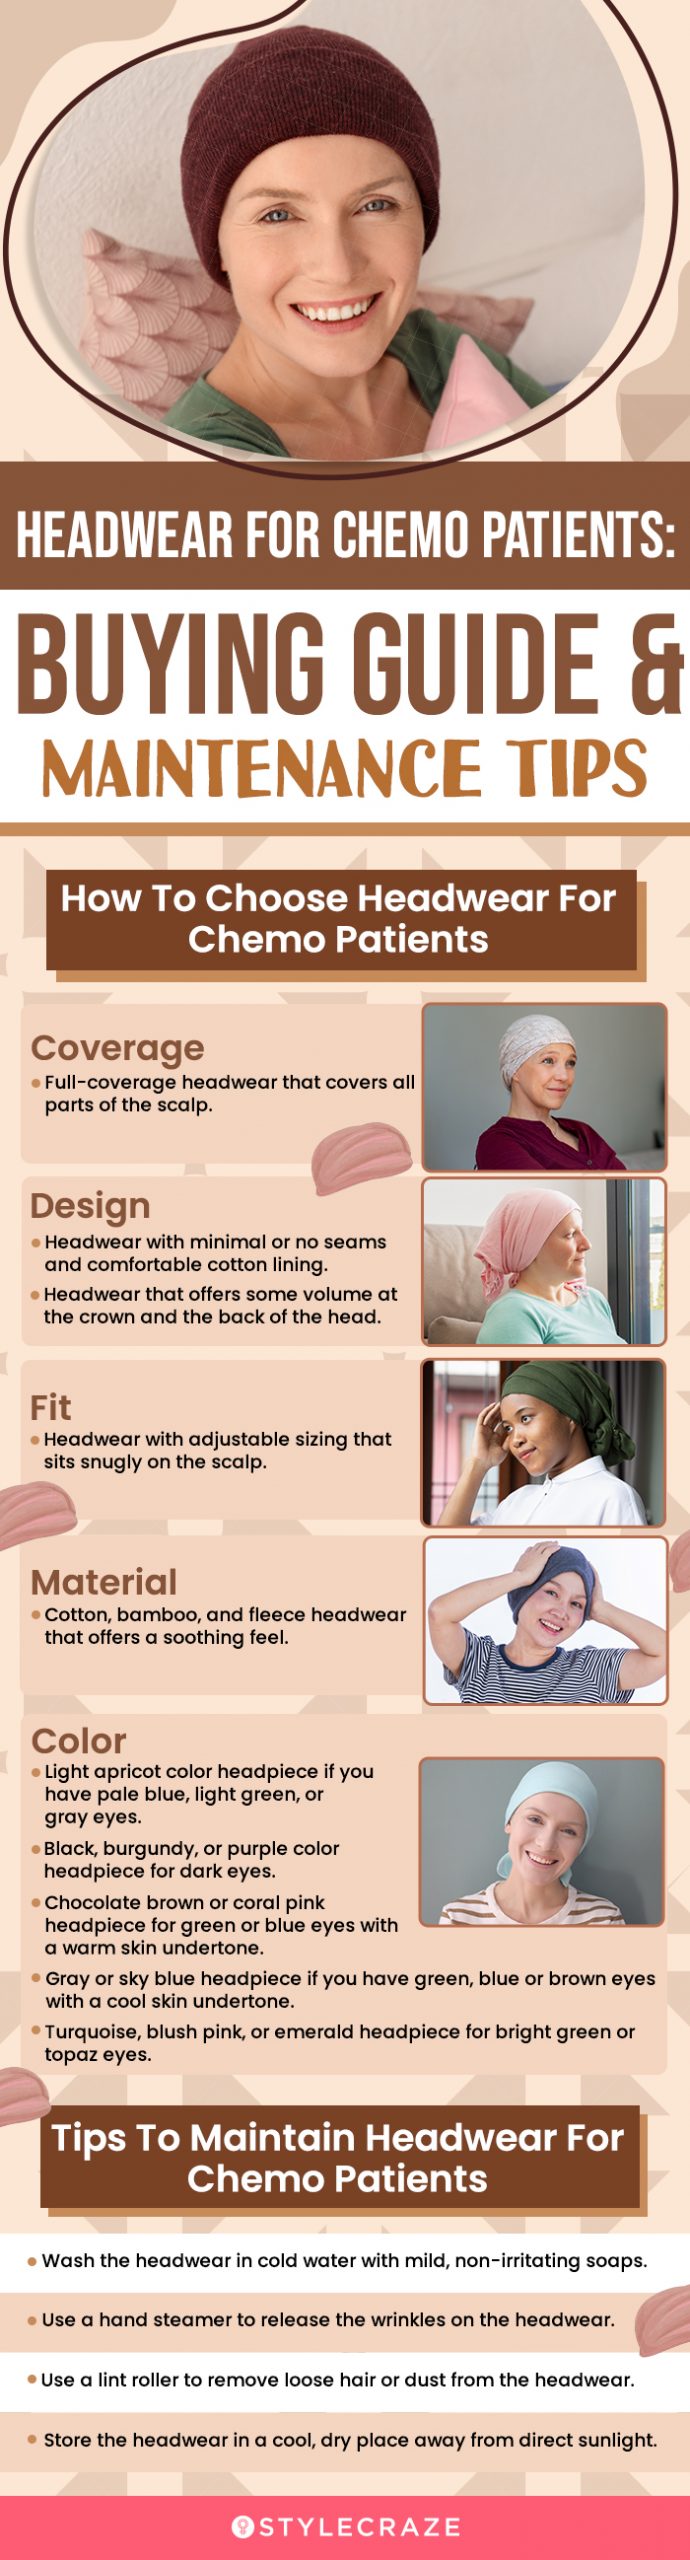 Headwear For Chemo Patients: Buying Guide And Maintenance Tips